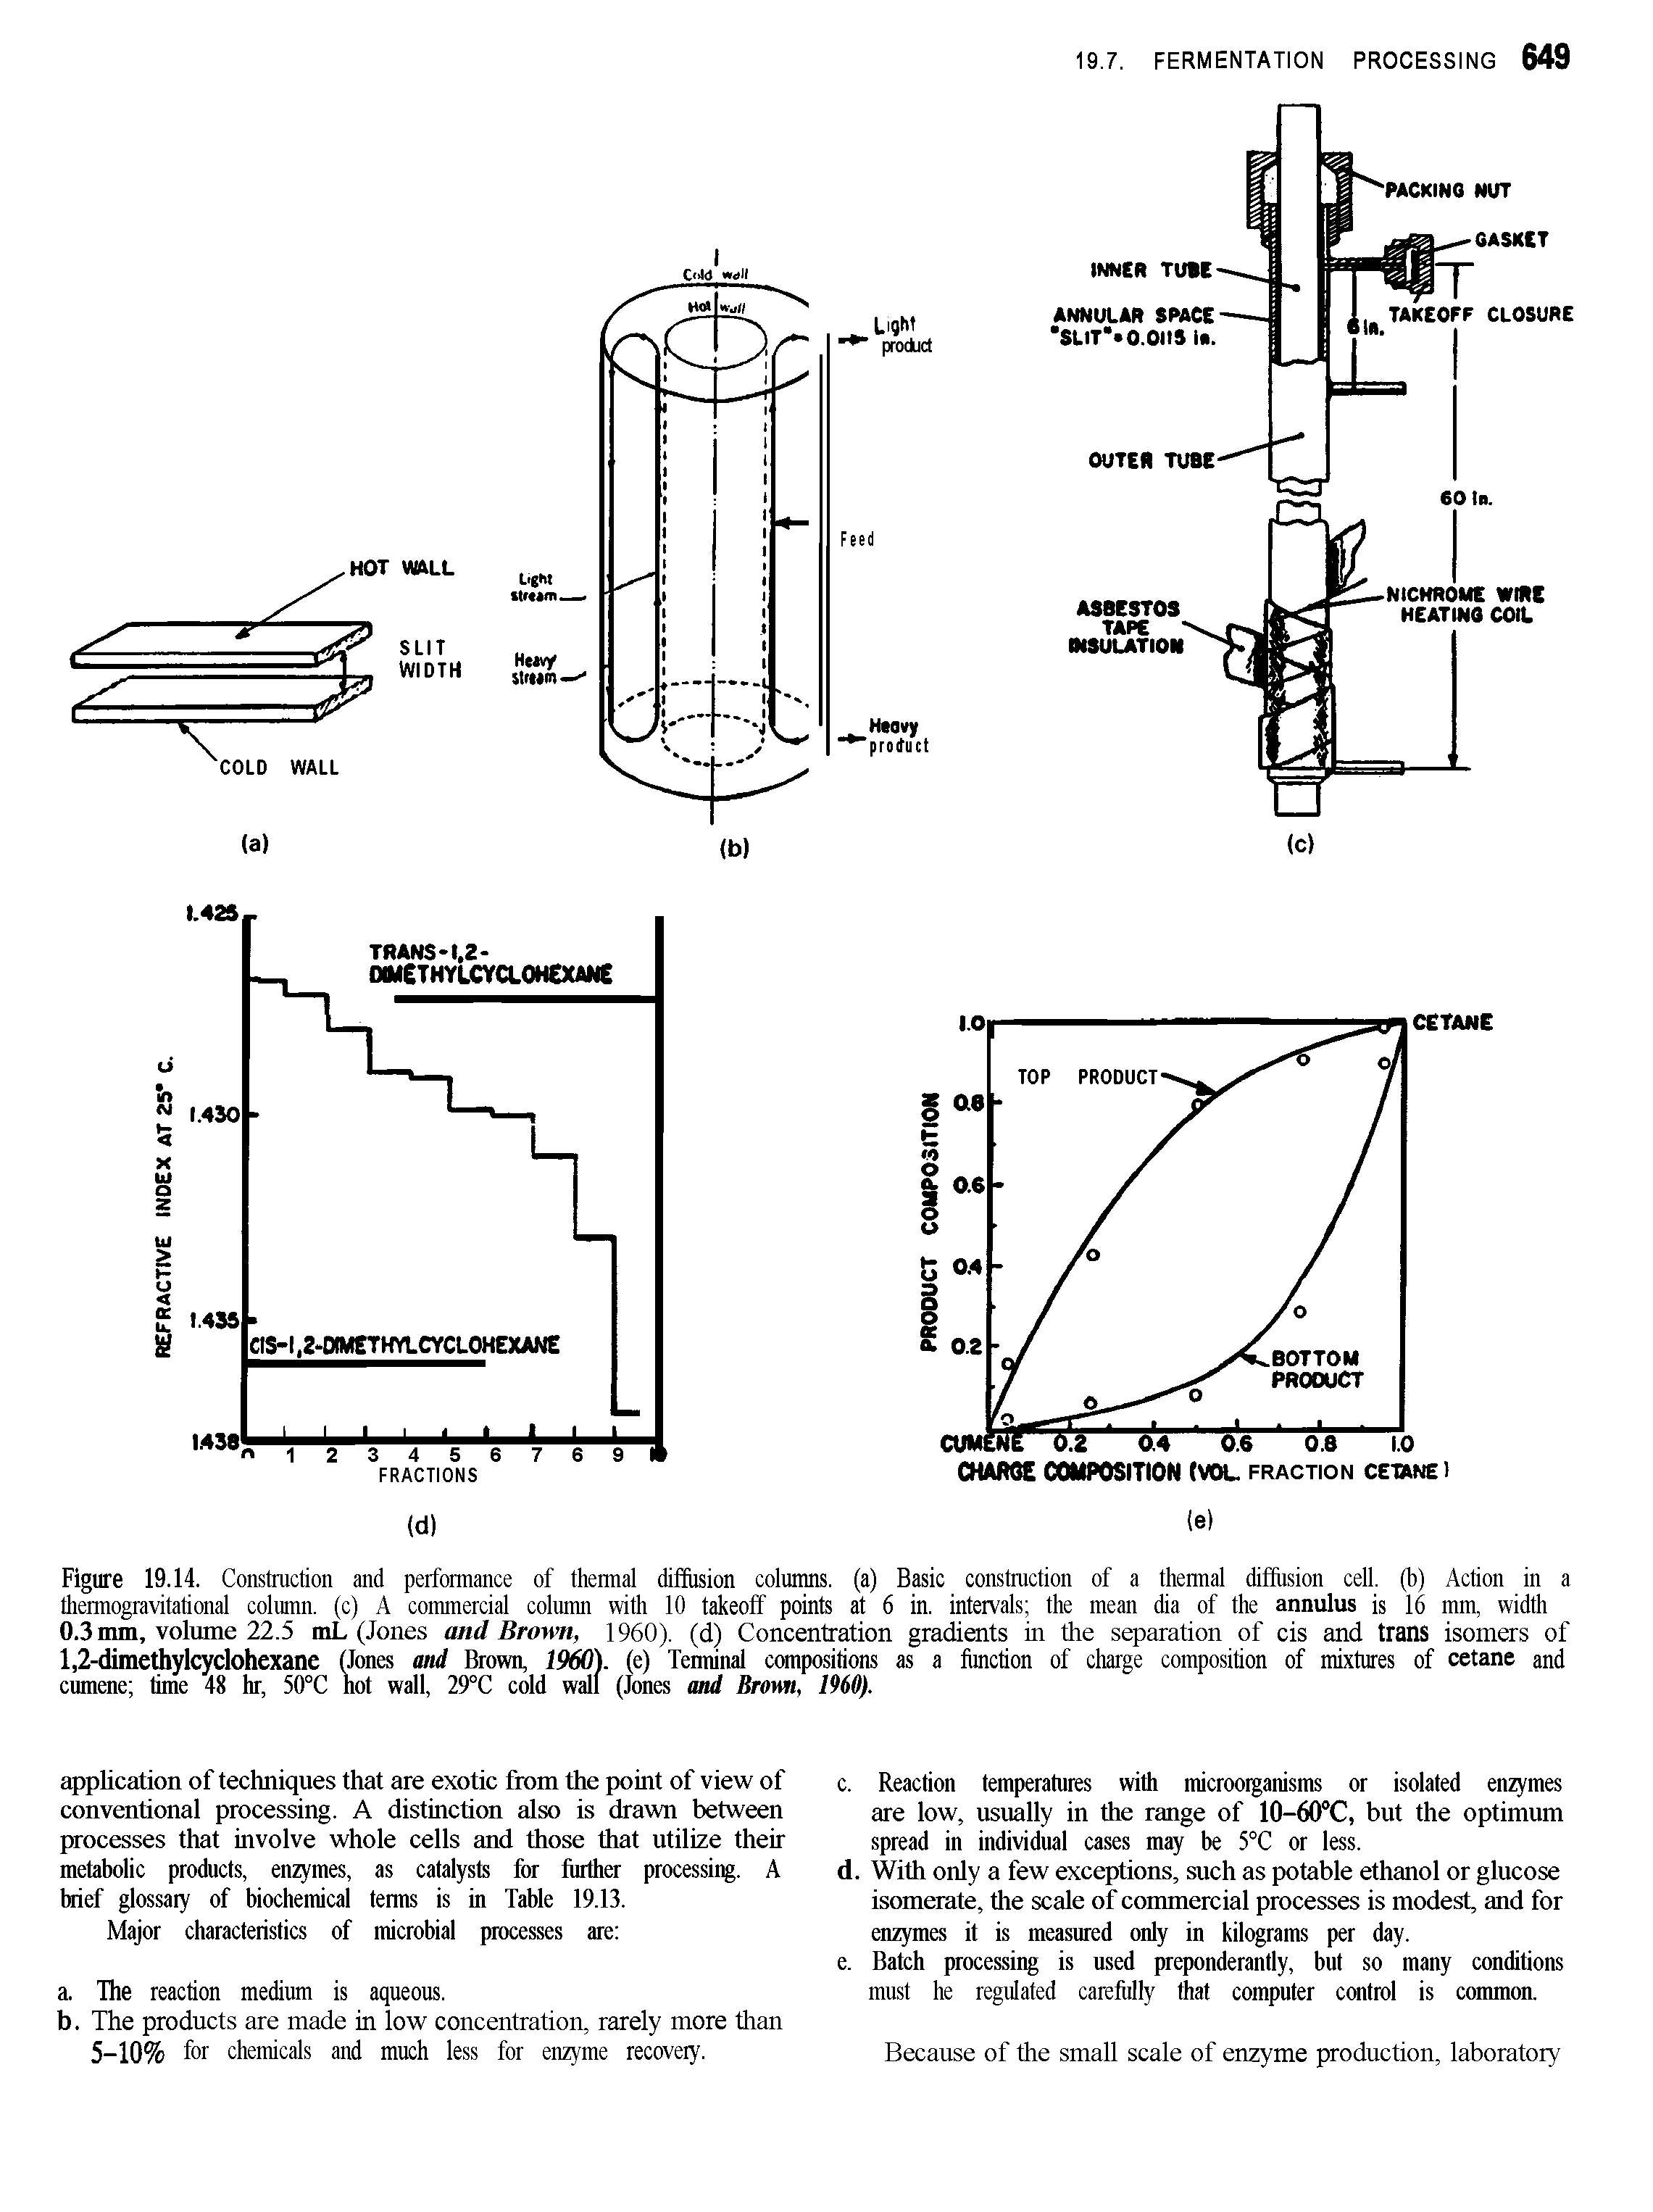 Figure 19.14. Construction and performance of thermal diffusion columns, (a) Basic constraction of a thermal diffusion cell, (b) Action in a thermogravitational column, (c) A commercial column with 10 takeoff points at 6 in. intervals the mean dia of the annulus is 16 mm, width 0.3mm, volume 22.5 mL (Jones and Brown, I960), (d) Concentration gradients in the separation of cis and trails isomers of 1,2-dimethylcyclohexane (Jones and Brown, I960), (e) Tenuinal compositions as a fimction of charge composition of mixtures of cetane and cumene lime 48 hr, 50°C not wall, 29°C cold wall (Jones and Brown, I960).